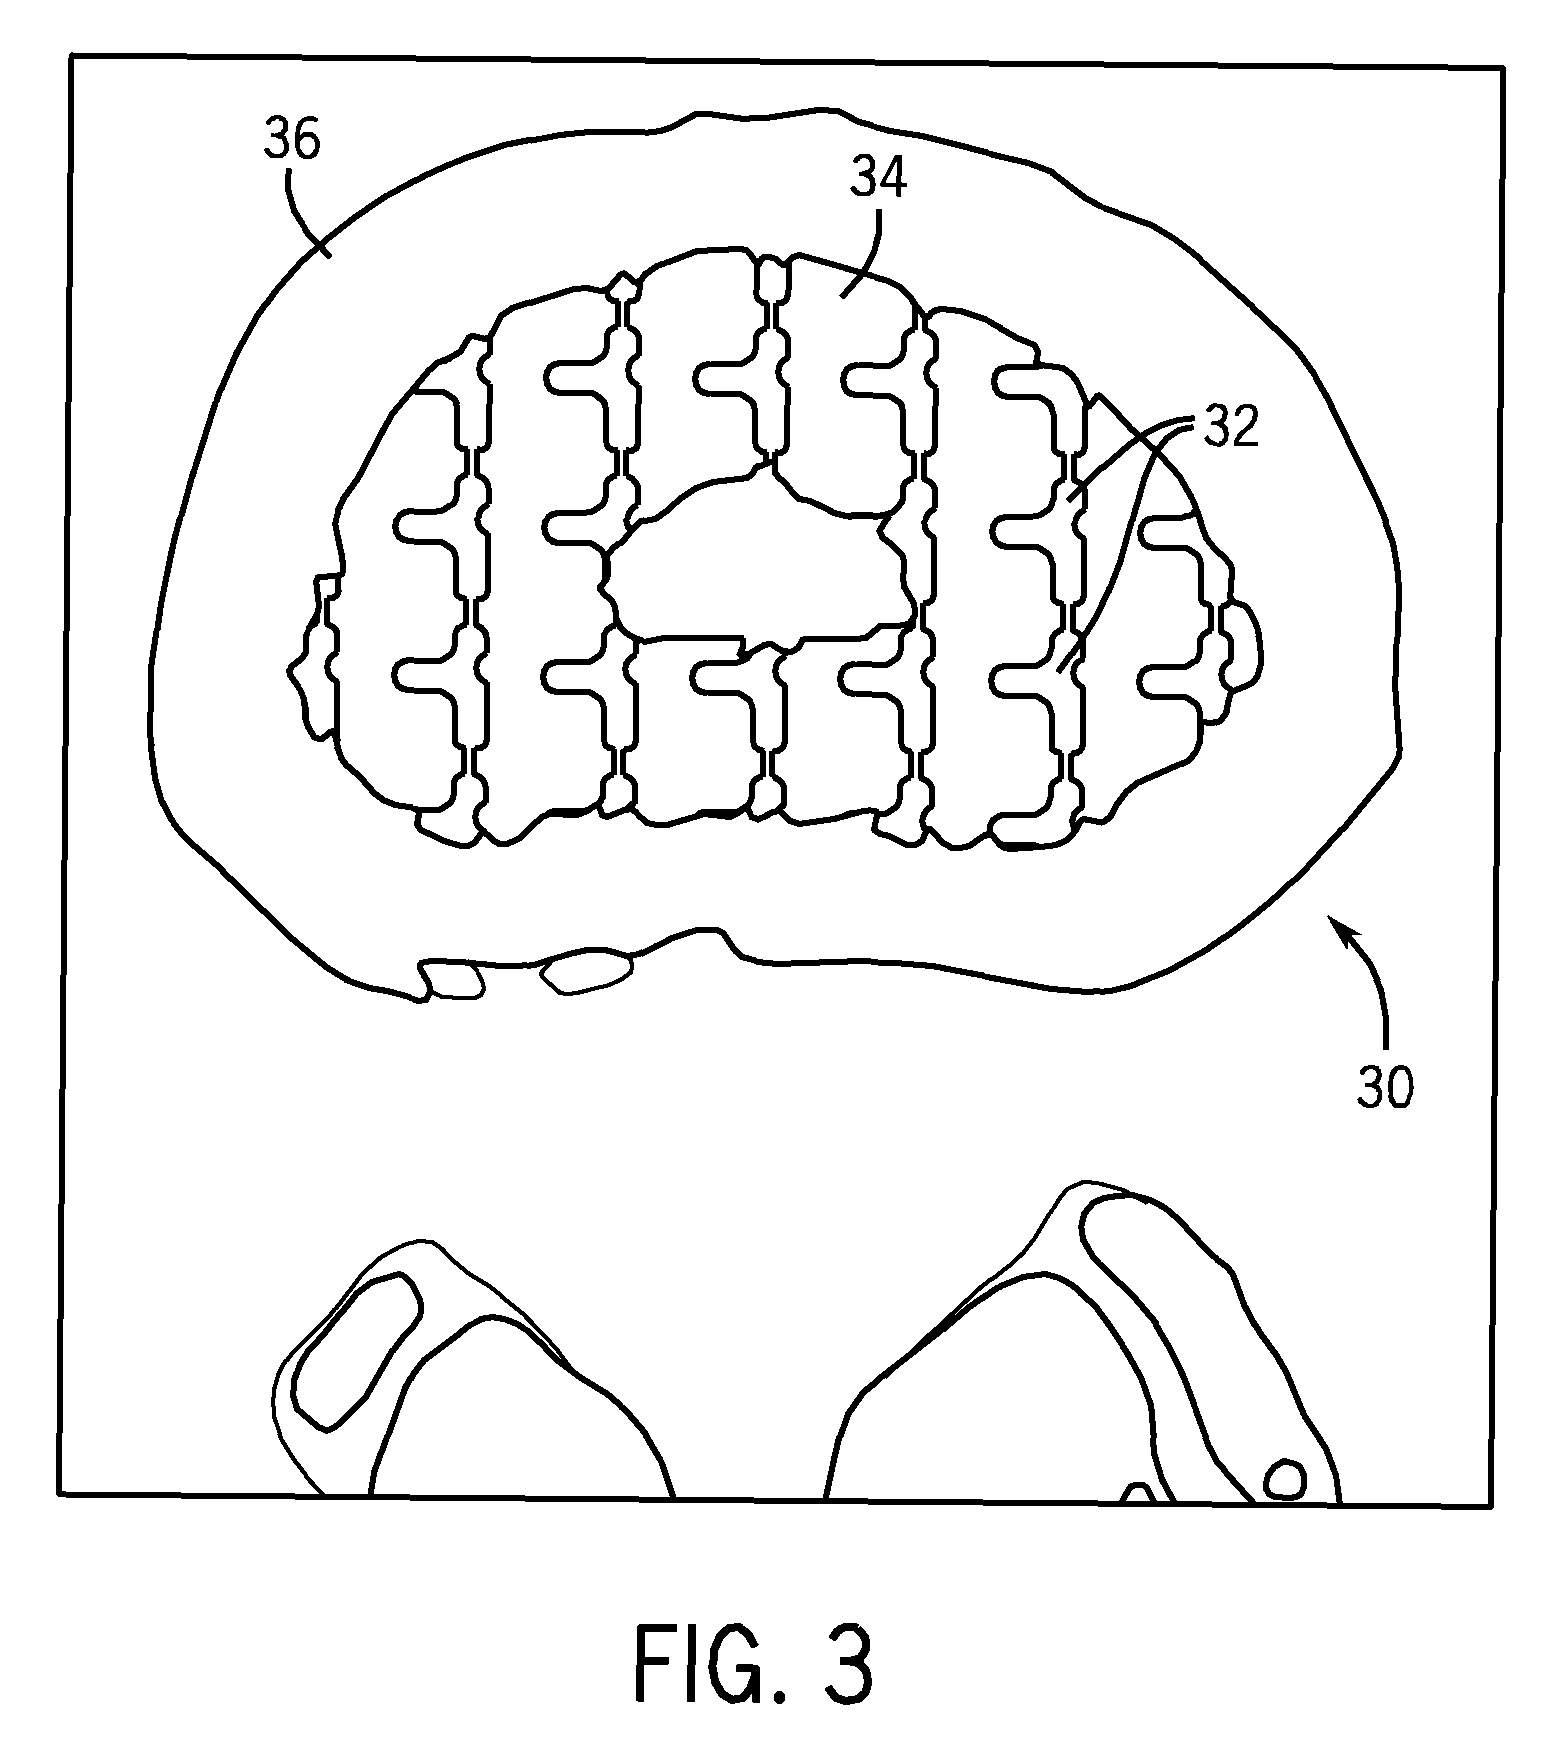 Engineered scaffolds for intervertebral disc repair and regeneration and for articulating joint repair and regeneration